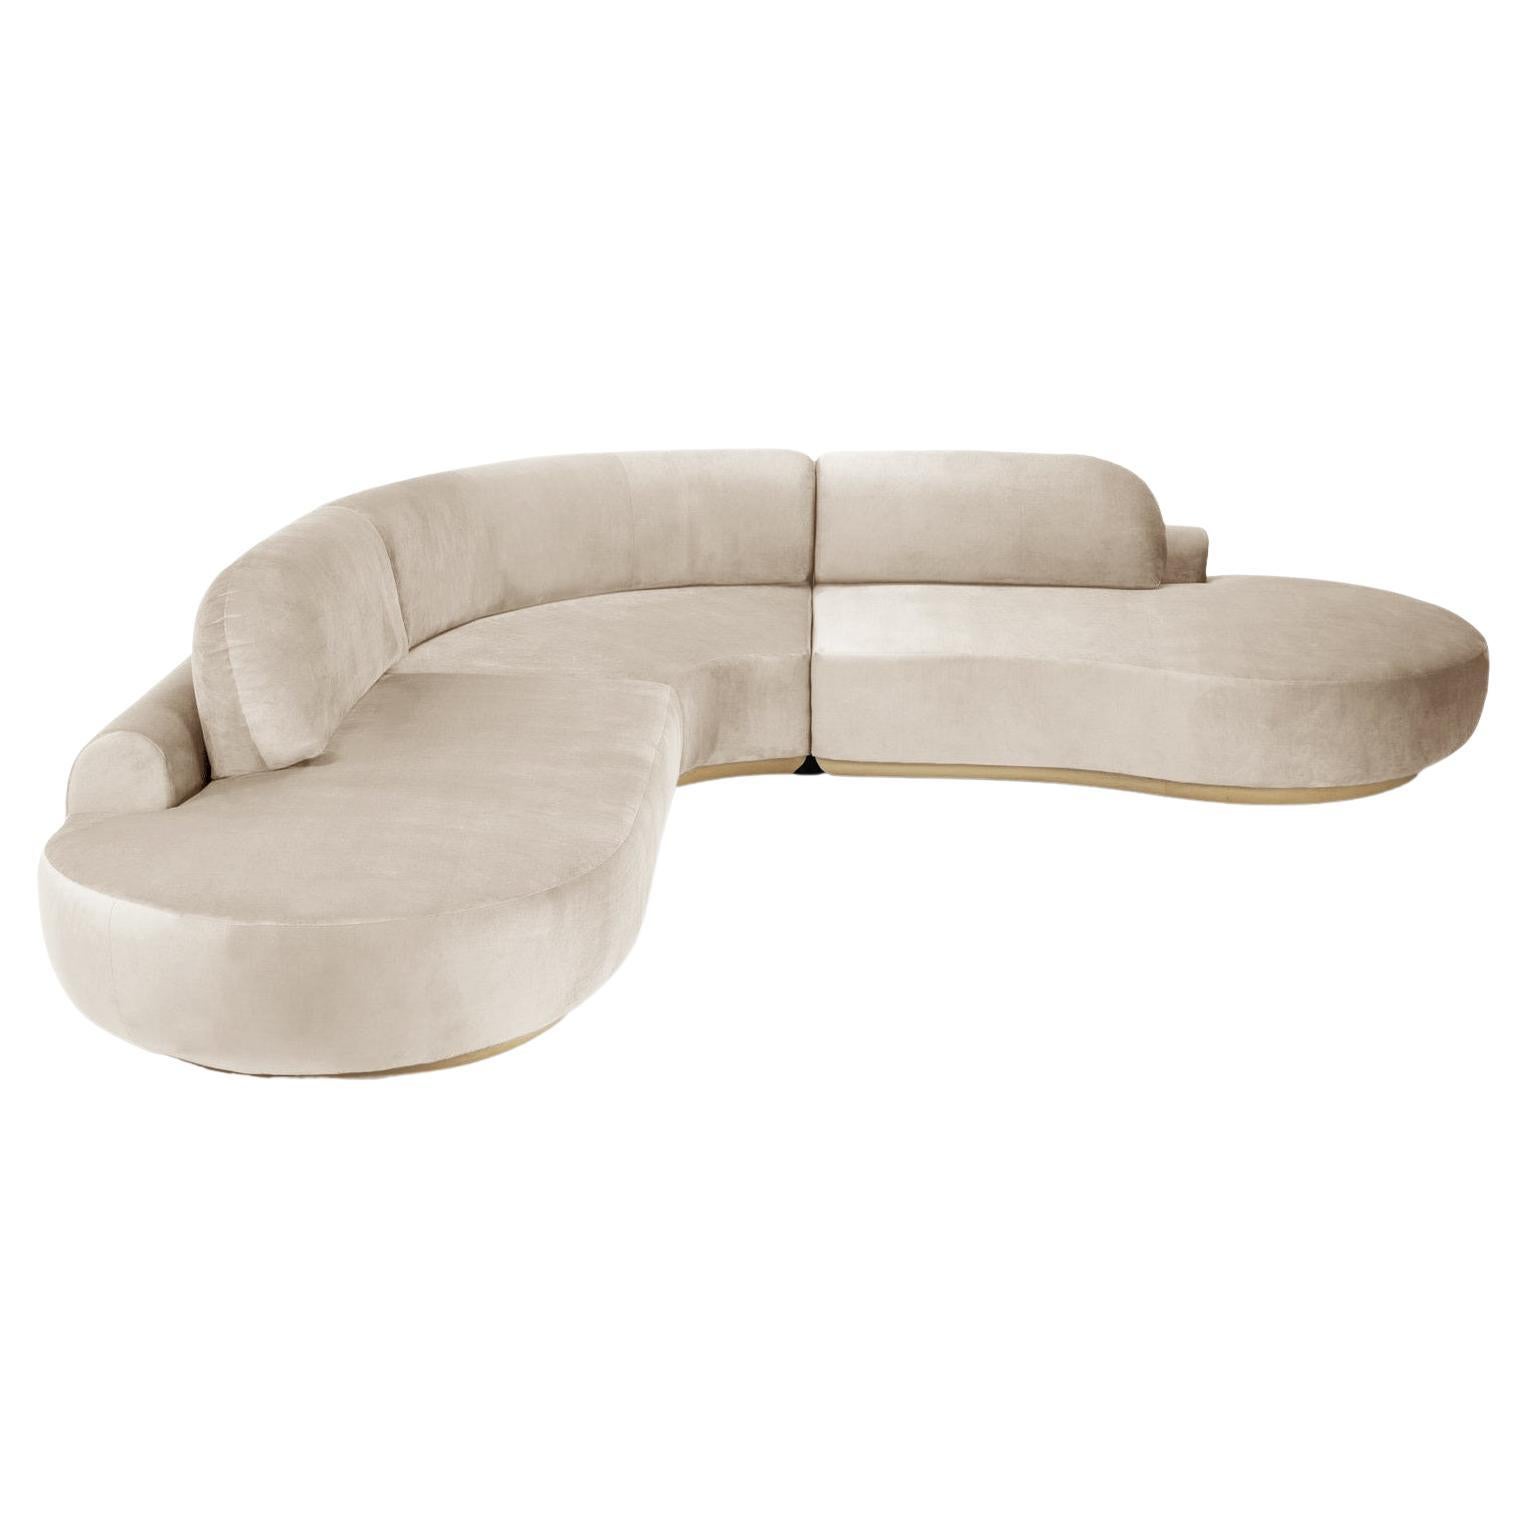 Naked Curved Sectional Sofa, 3 Piece with Natural Oak and Boucle Snow For Sale